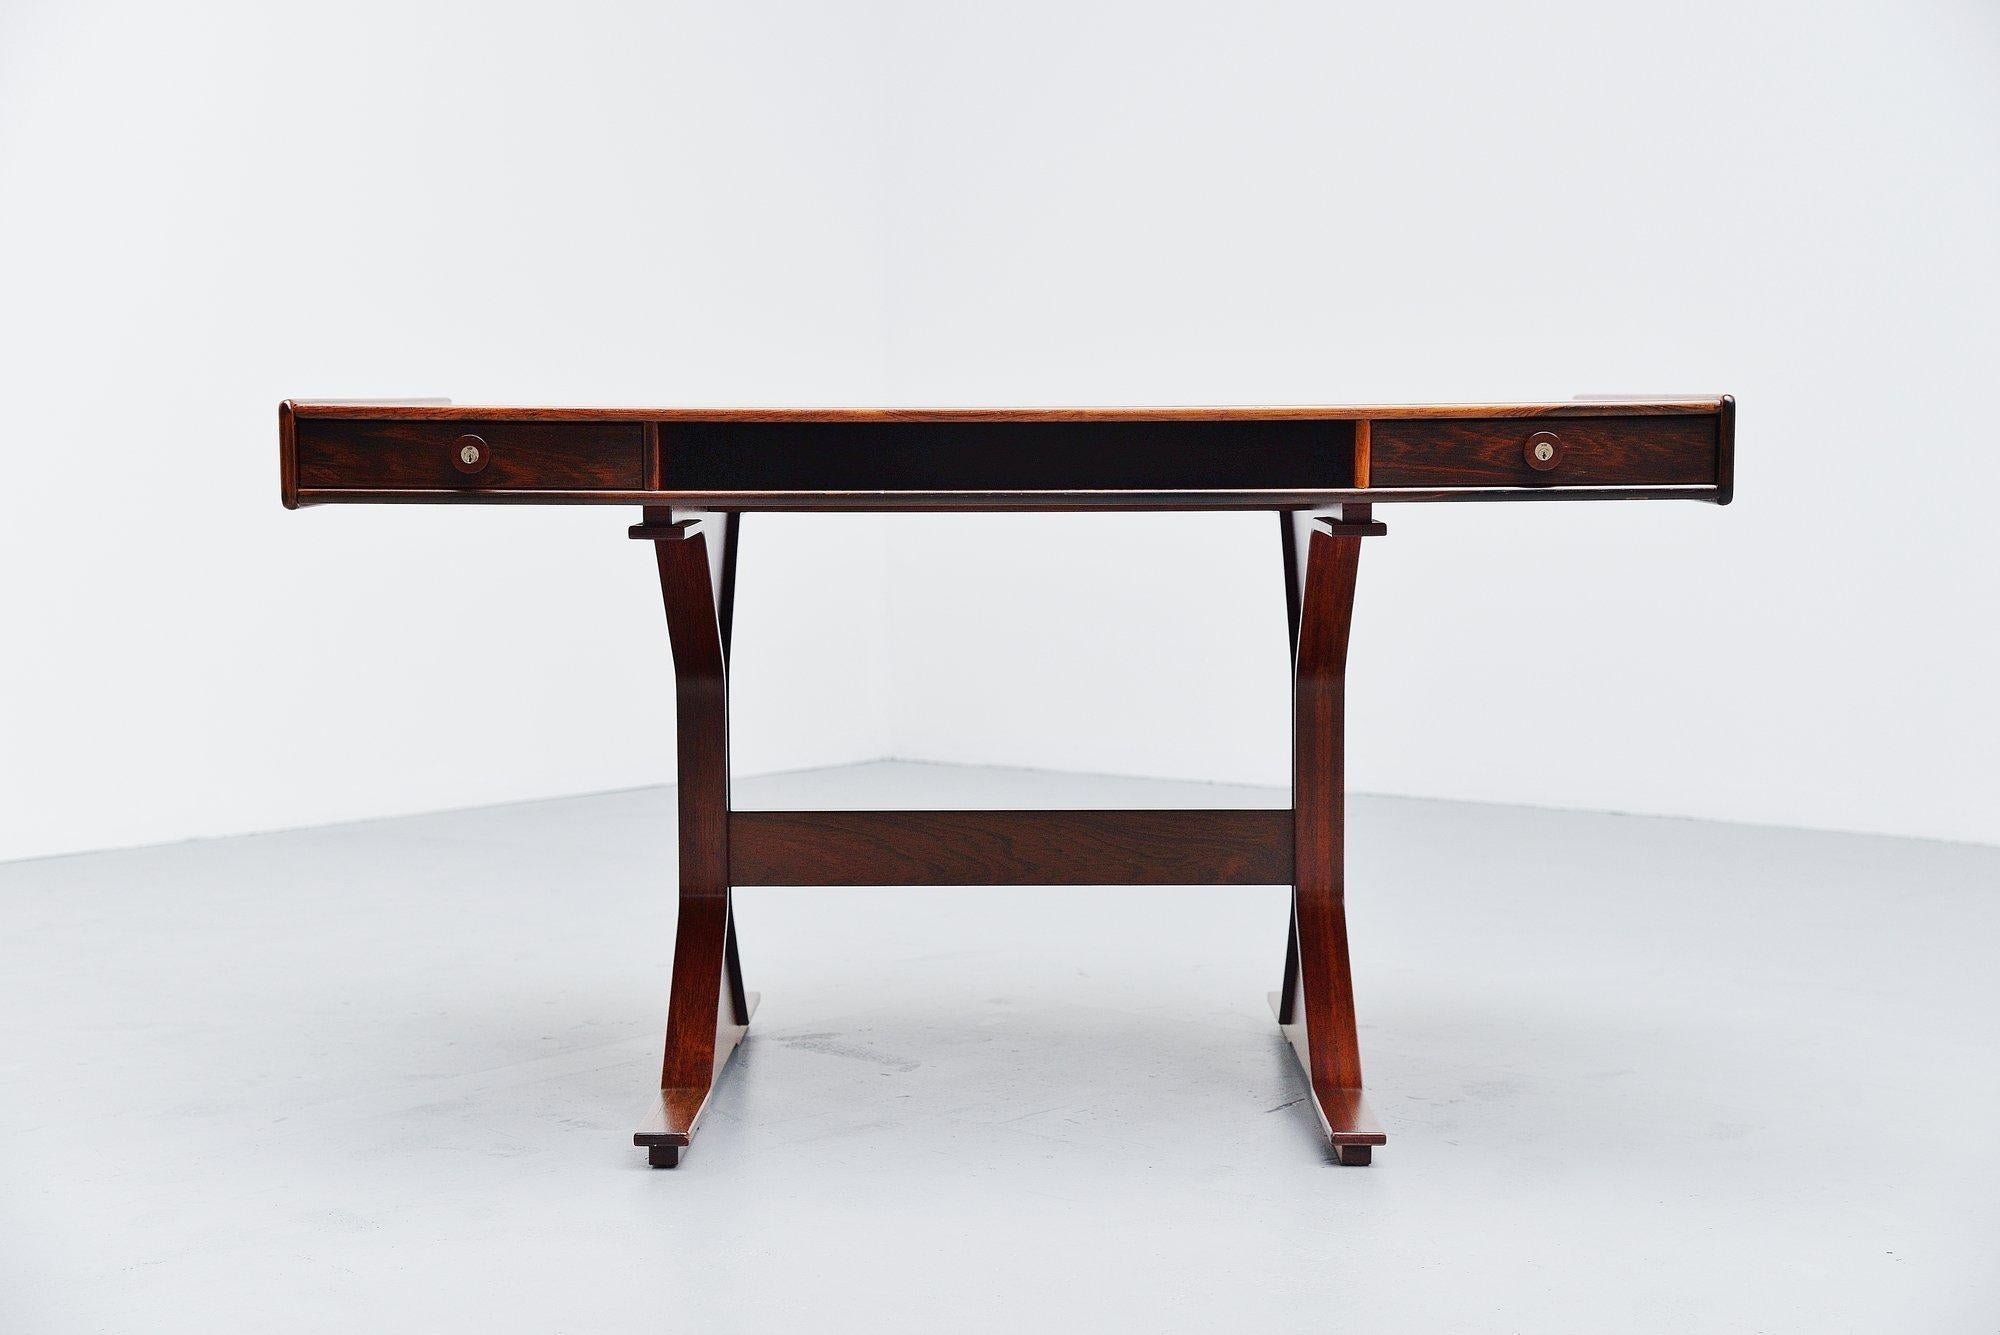 Fantastic Italian writing desk model 530 designed by Gianfranco Frattini and manufactured by Bernini, Italy 1957. This desk is made of nicely grained rosewood veneer and its looks very nice and slim. The lining of this desk is whats makes this desk